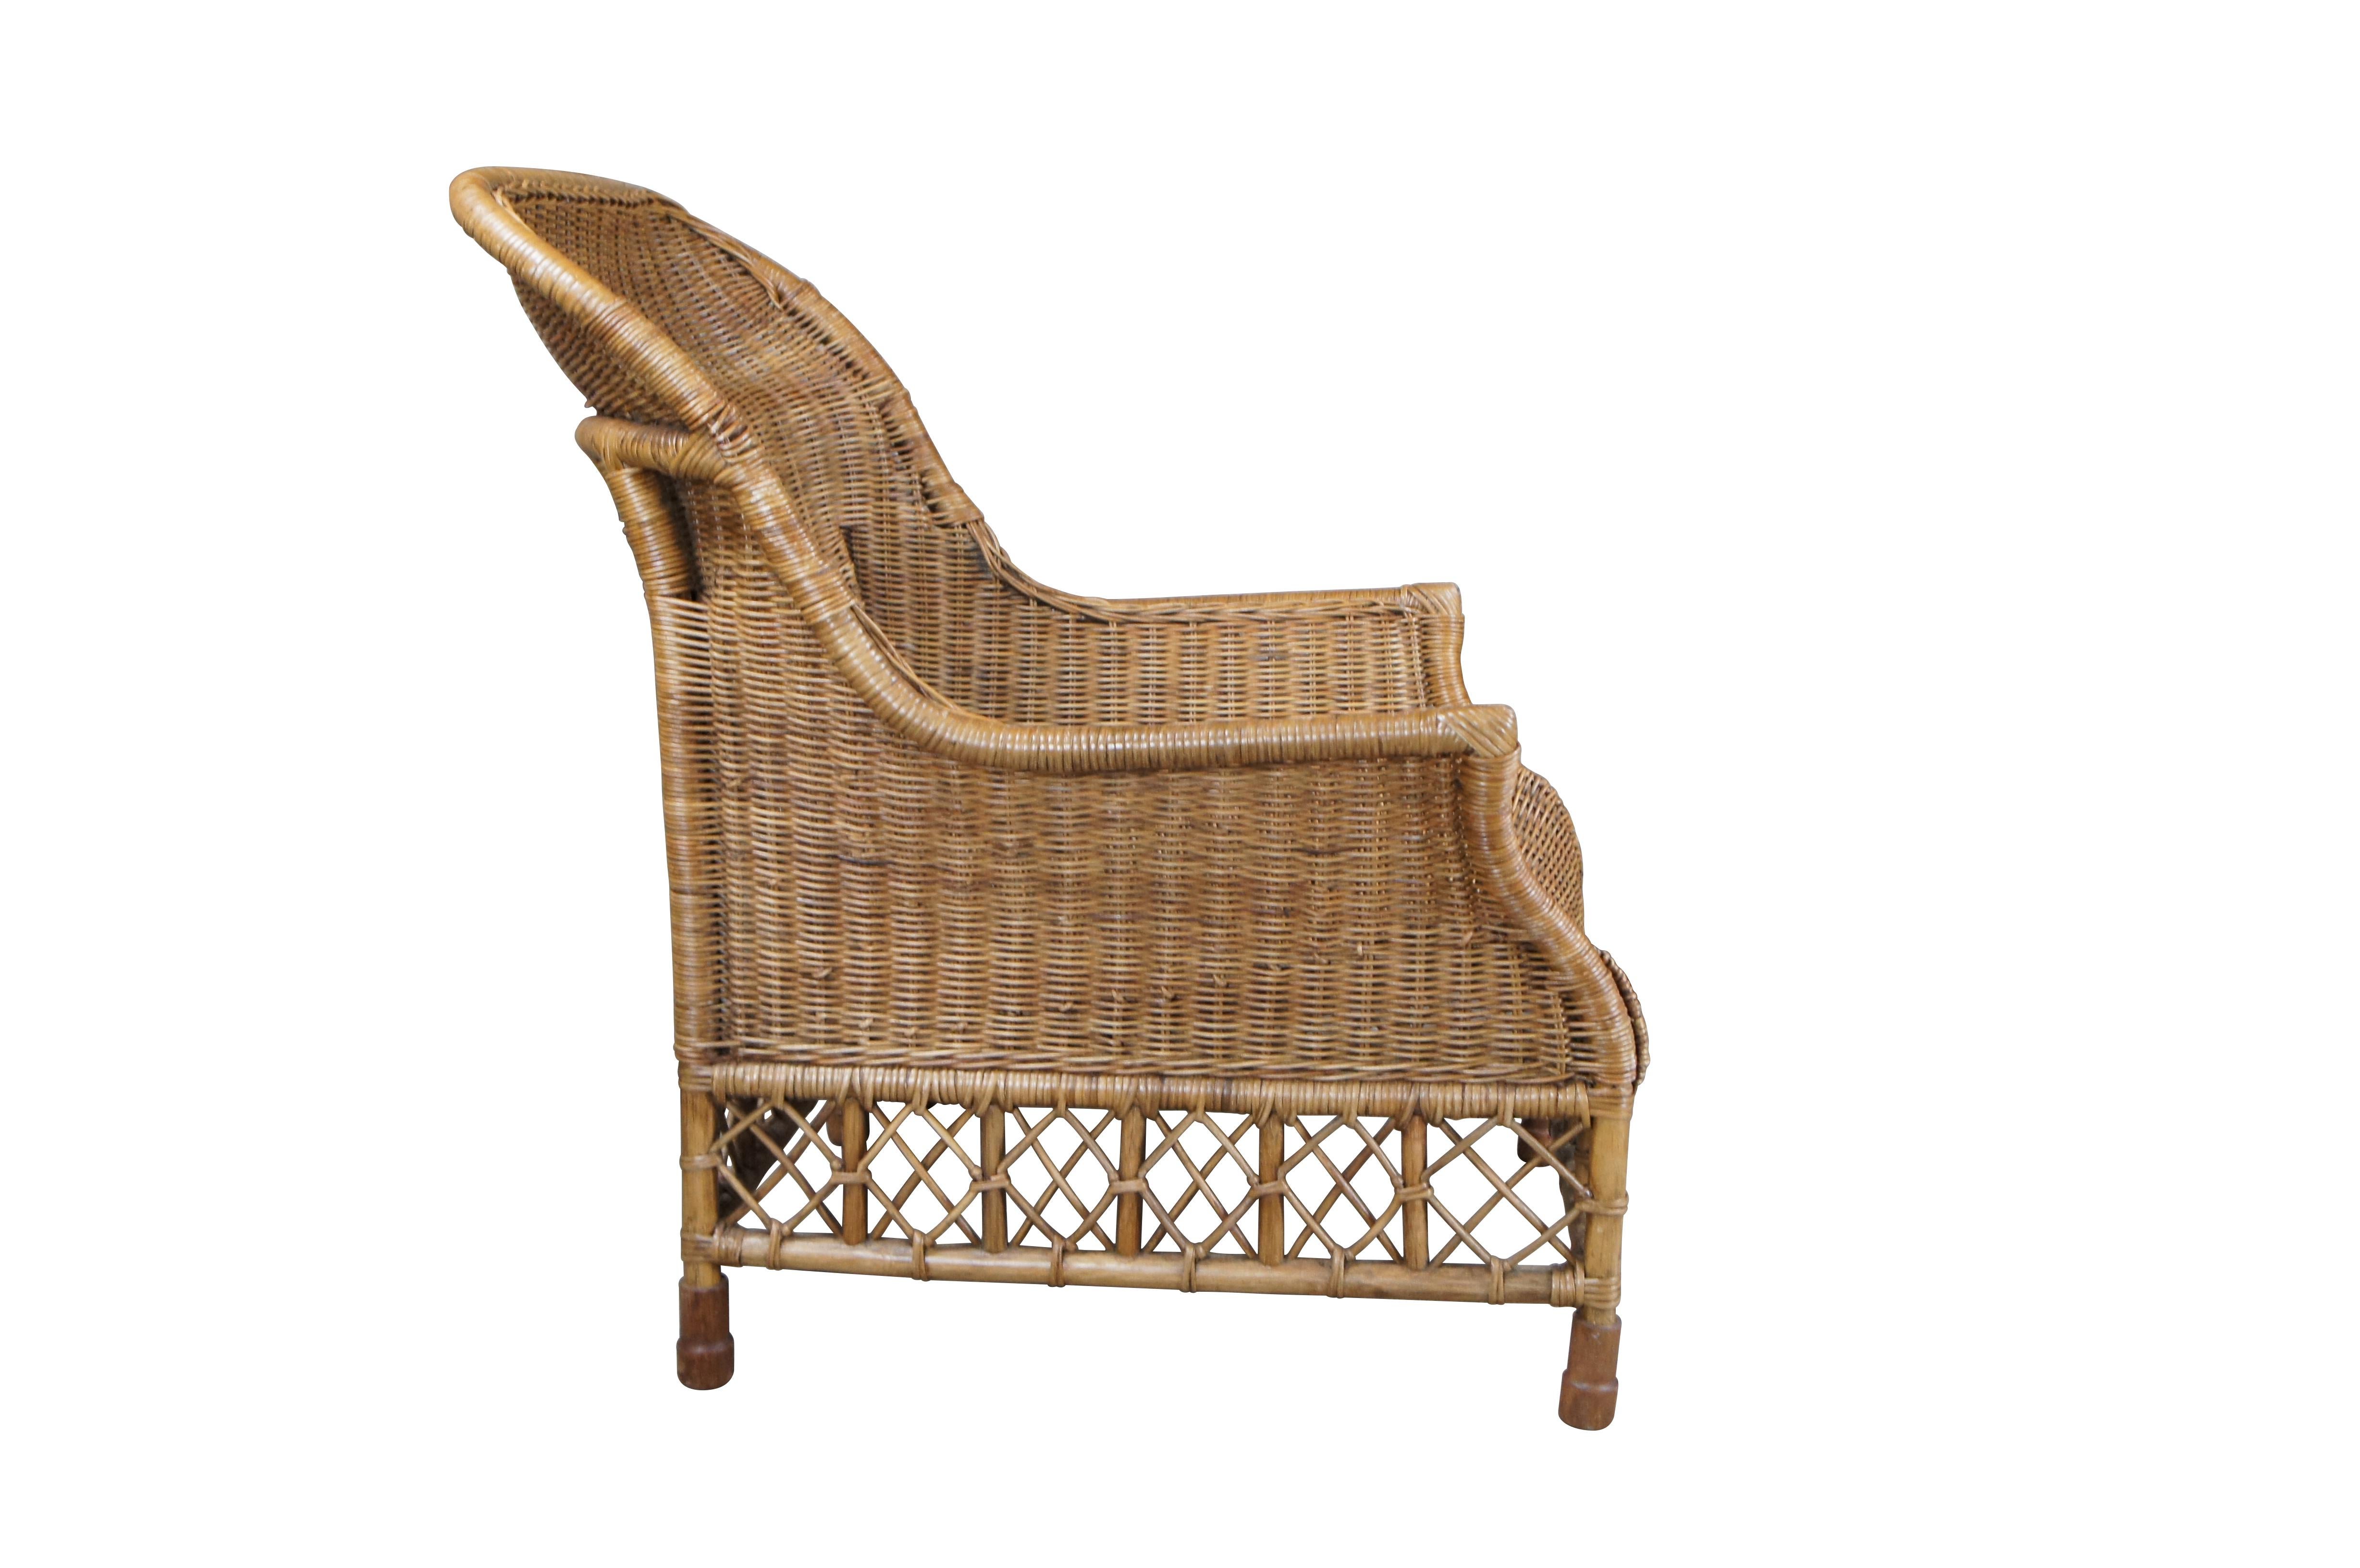 Late 20th Century bohemian modern wicker lounge chair. Features a sloped frame with deep contoured back and lattice apron along the base.

Dimensions:
30